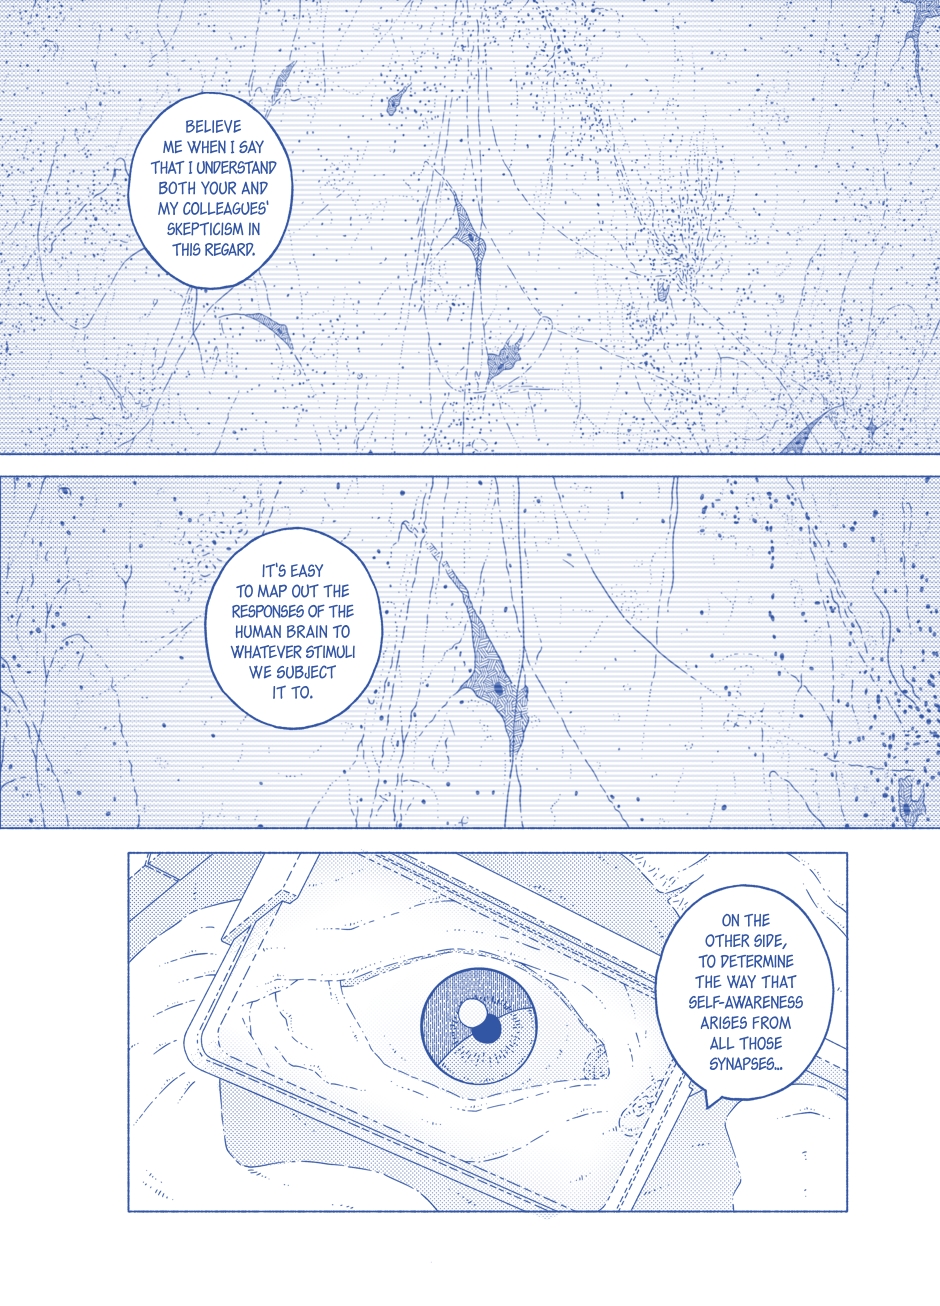 Comic page, done in blue ink. There are three panels, the first two showing a zoom-in into a neuron, and the third one showing an eye with the iris in the same place the neuron was. The text talks about the difficulty of knowing how self-awareness arises in the human brain.